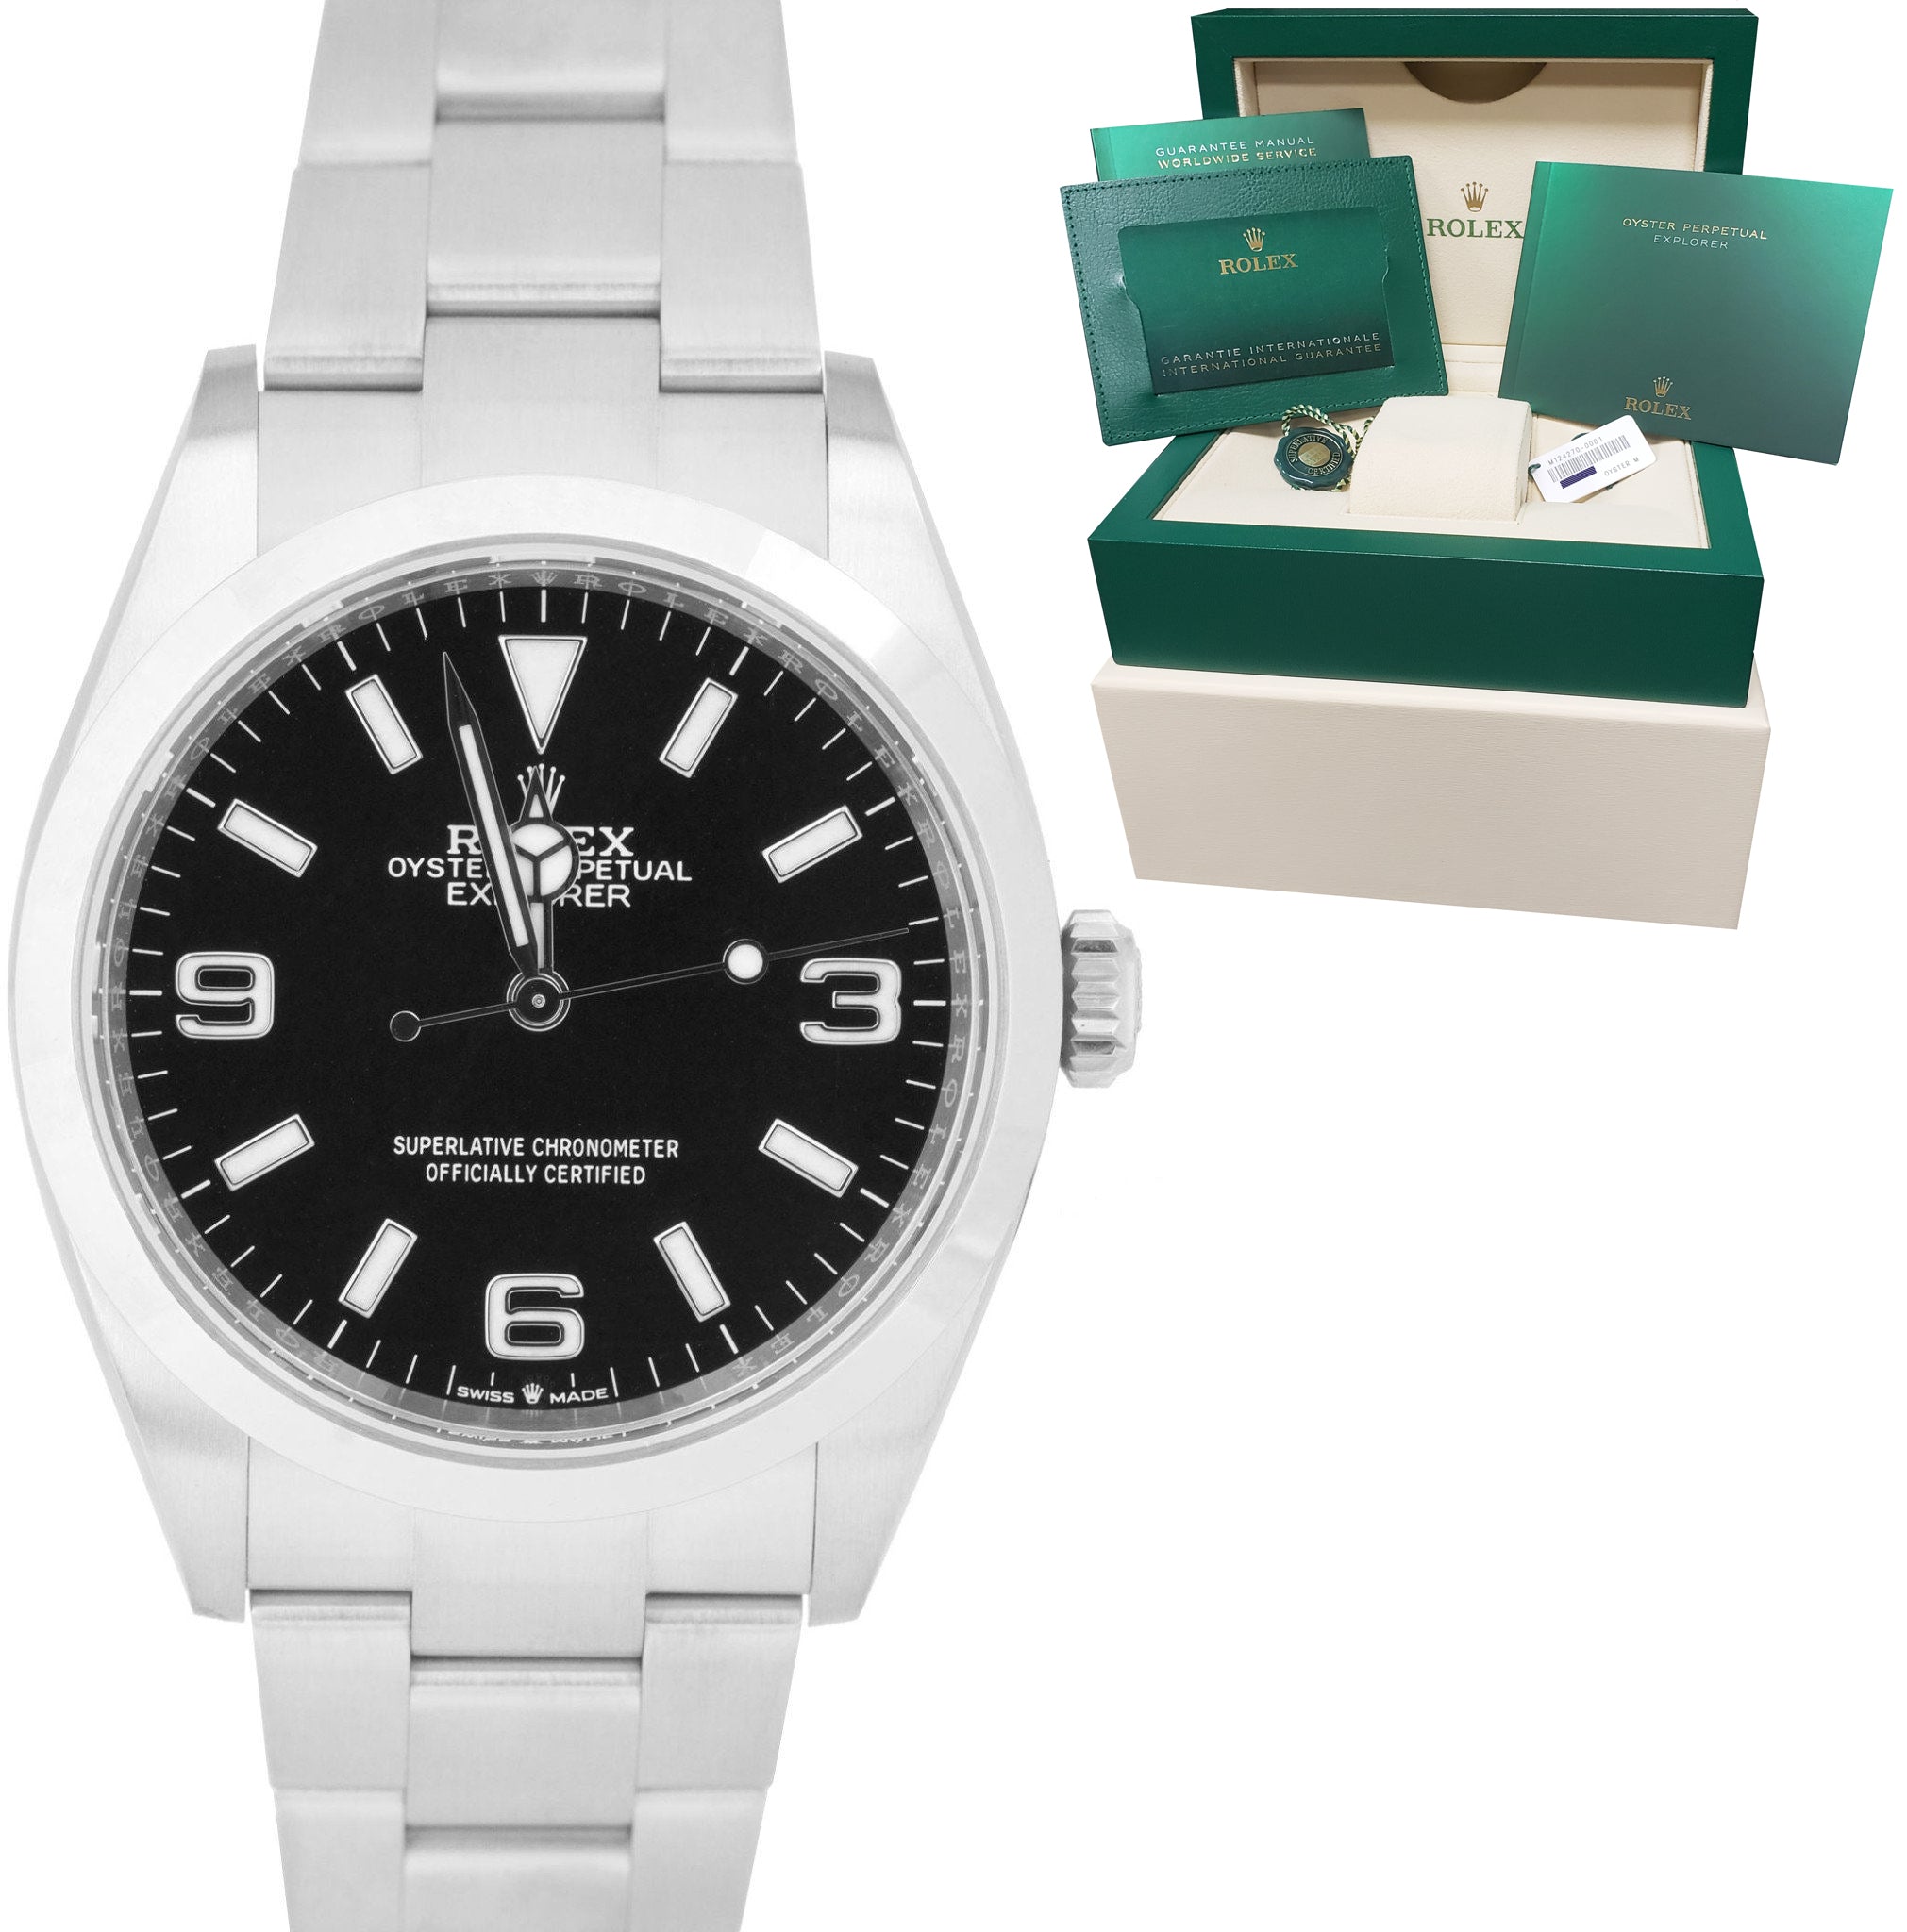 NEW MARCH 2022 Rolex Explorer I Black 36mm Stainless Steel Oyster Watch 124270